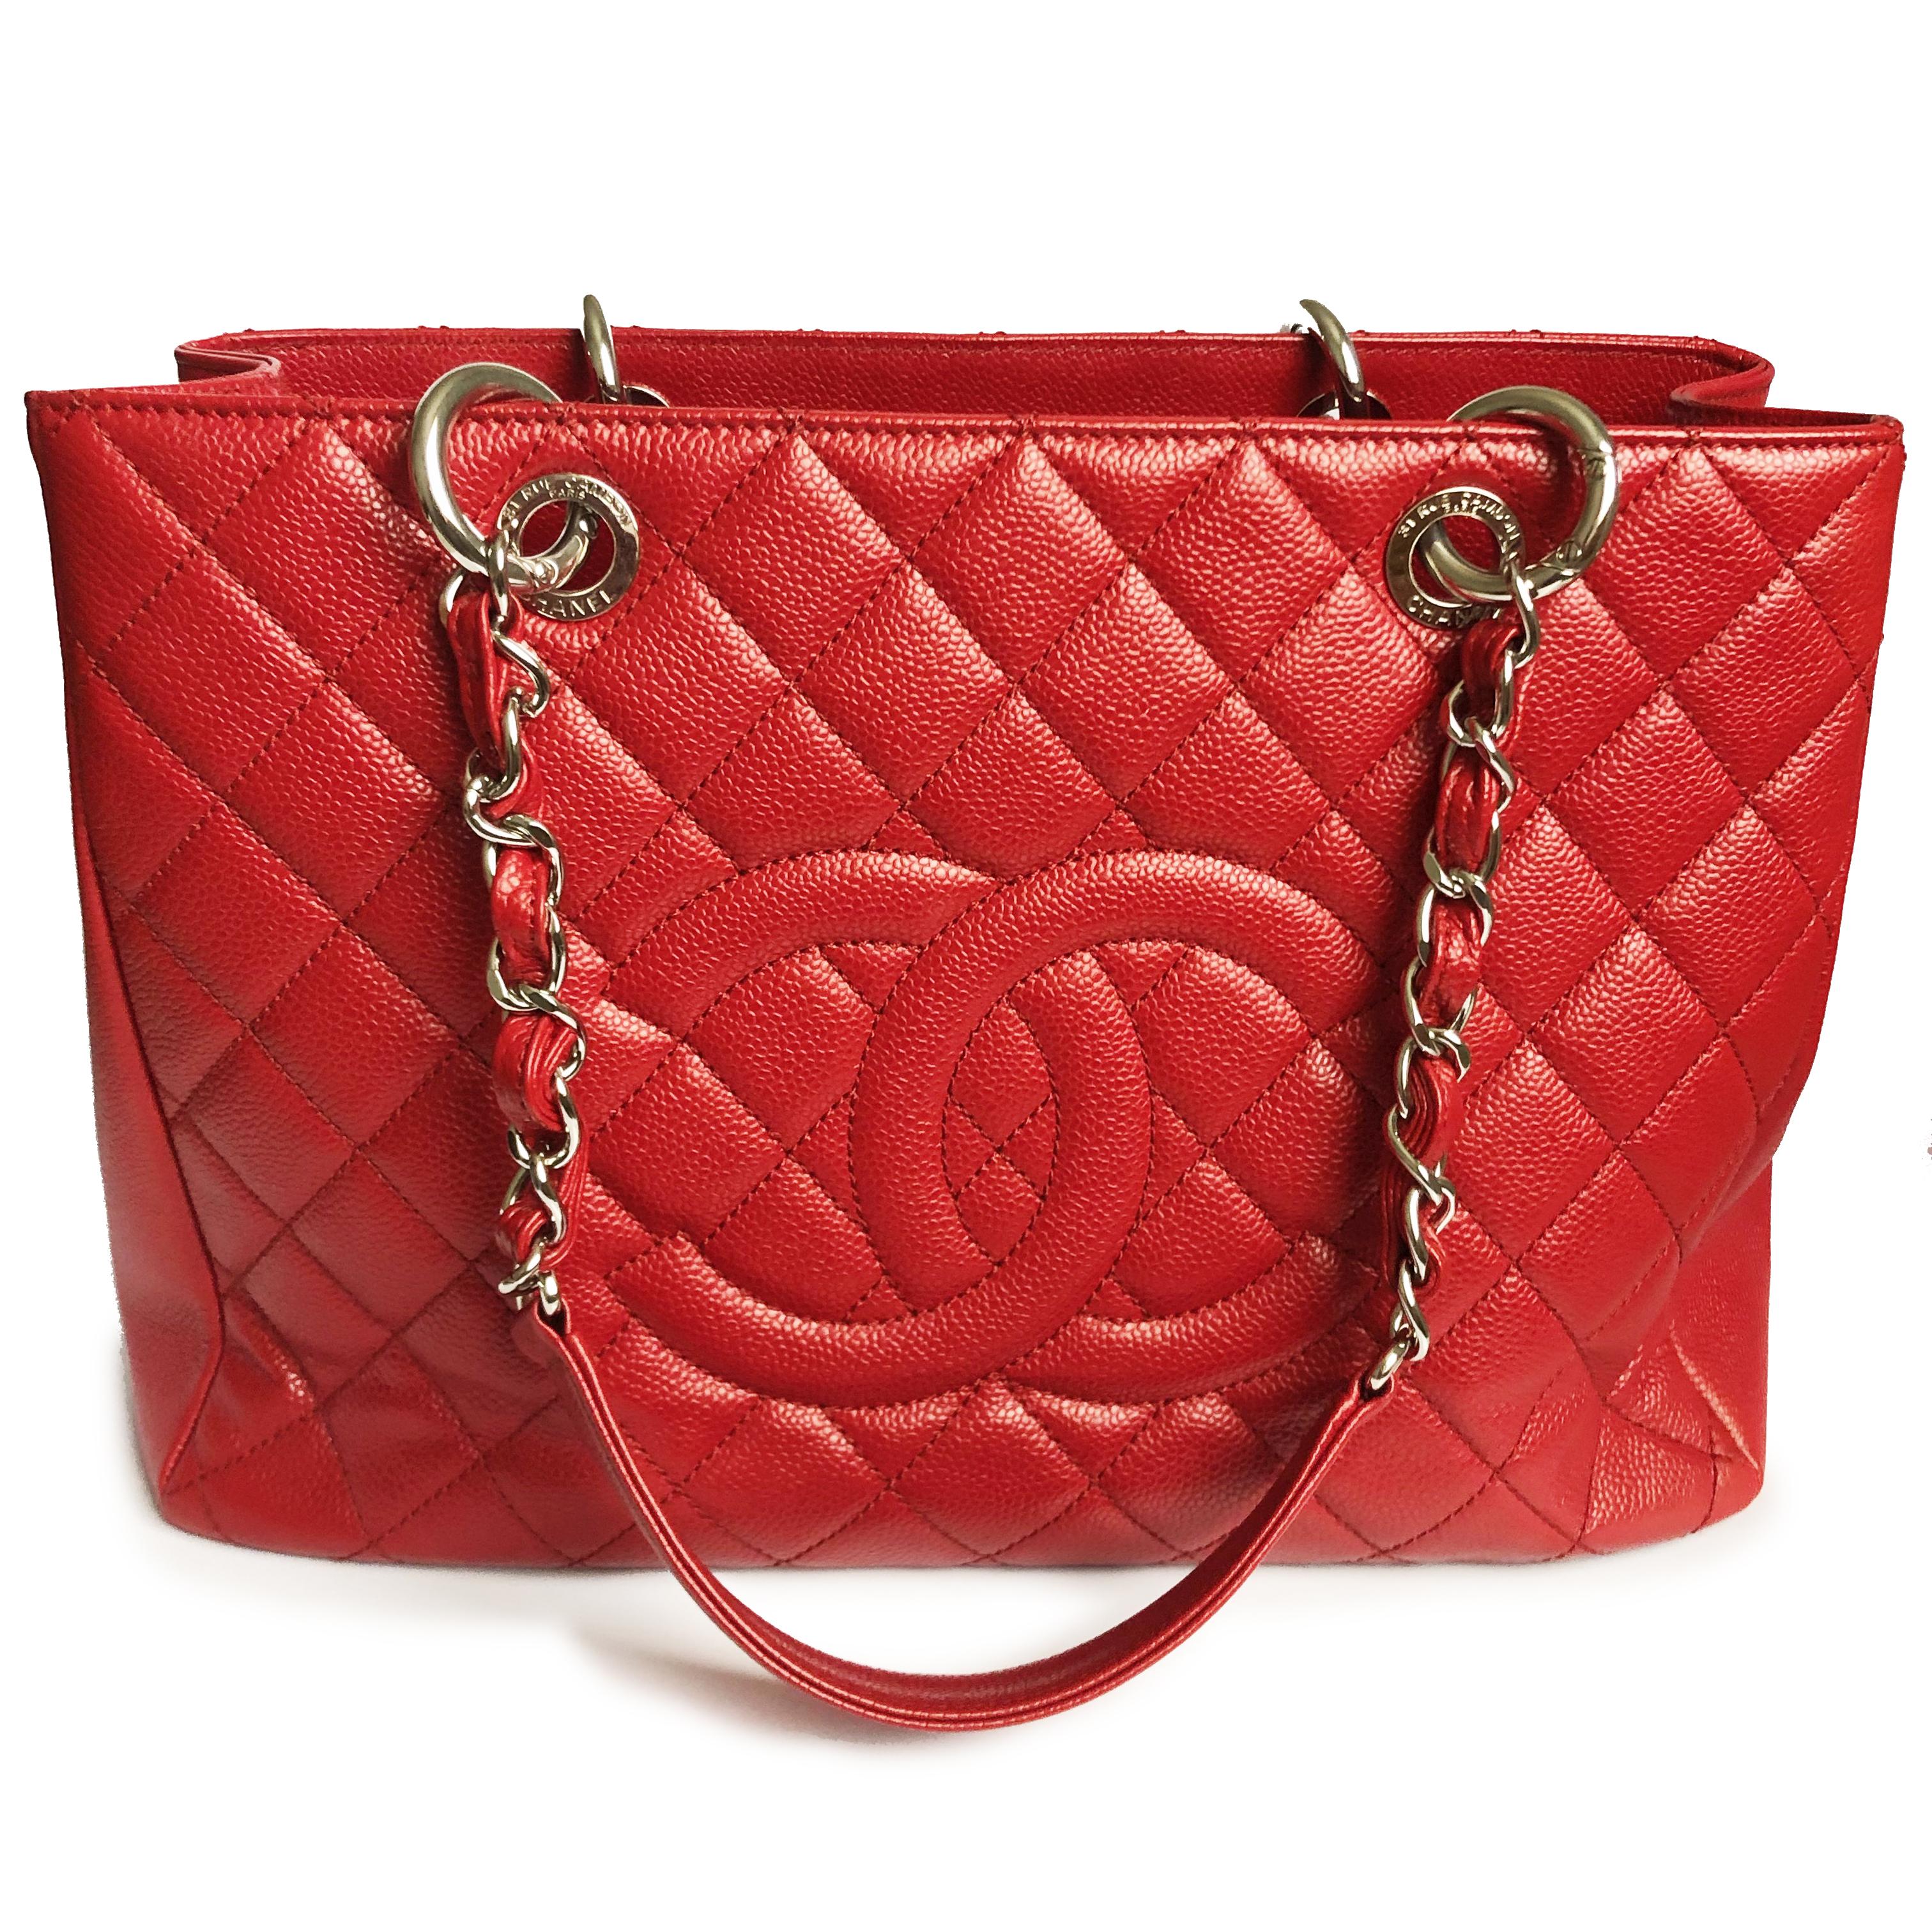 Chanel GST Grand Shopping Tote Shoulder Bag Red Caviar Leather Silver HW 2013 3